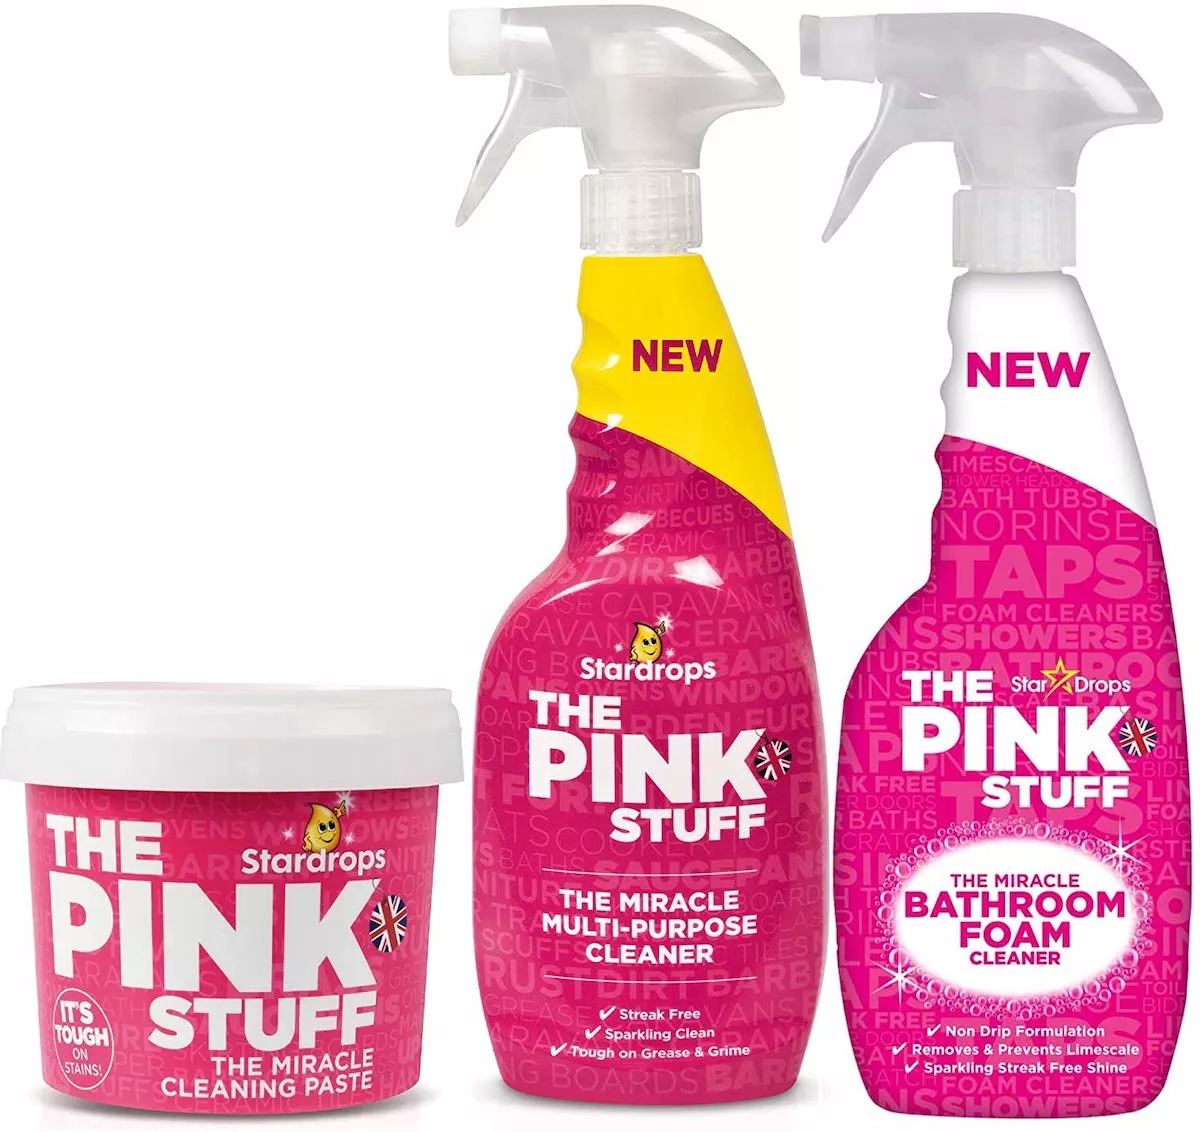 10 areas of the home you can clean with the viral £1.50 Pink Stuff